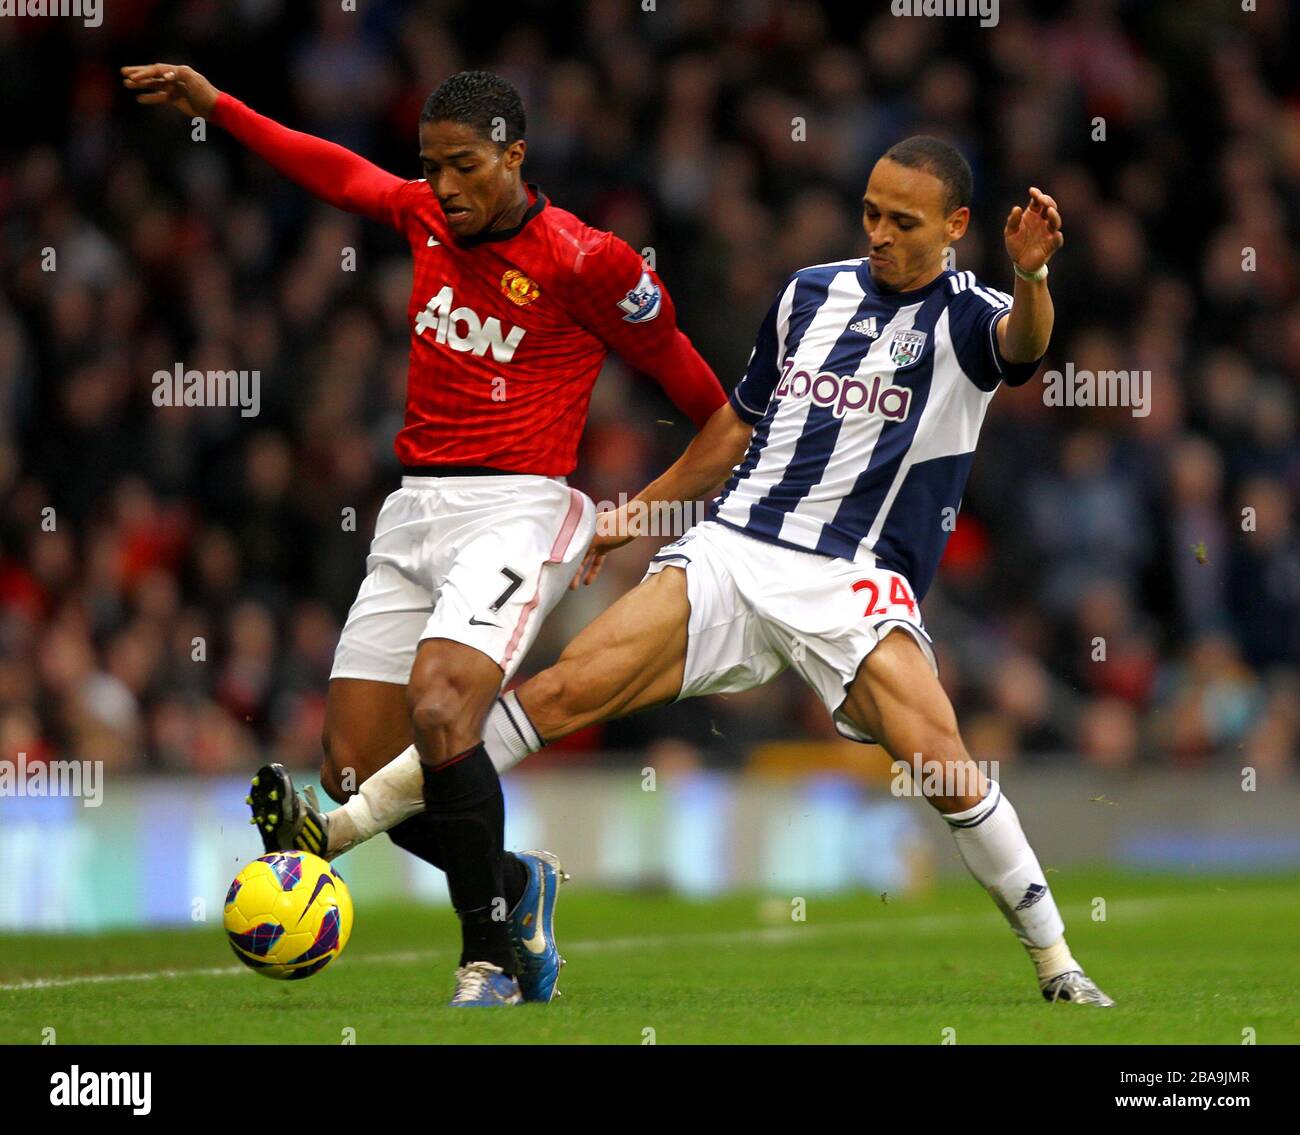 Manchester United's Antonio Valencia (left) and West Bromwich Albion's Peter Odemwingie in action Stock Photo